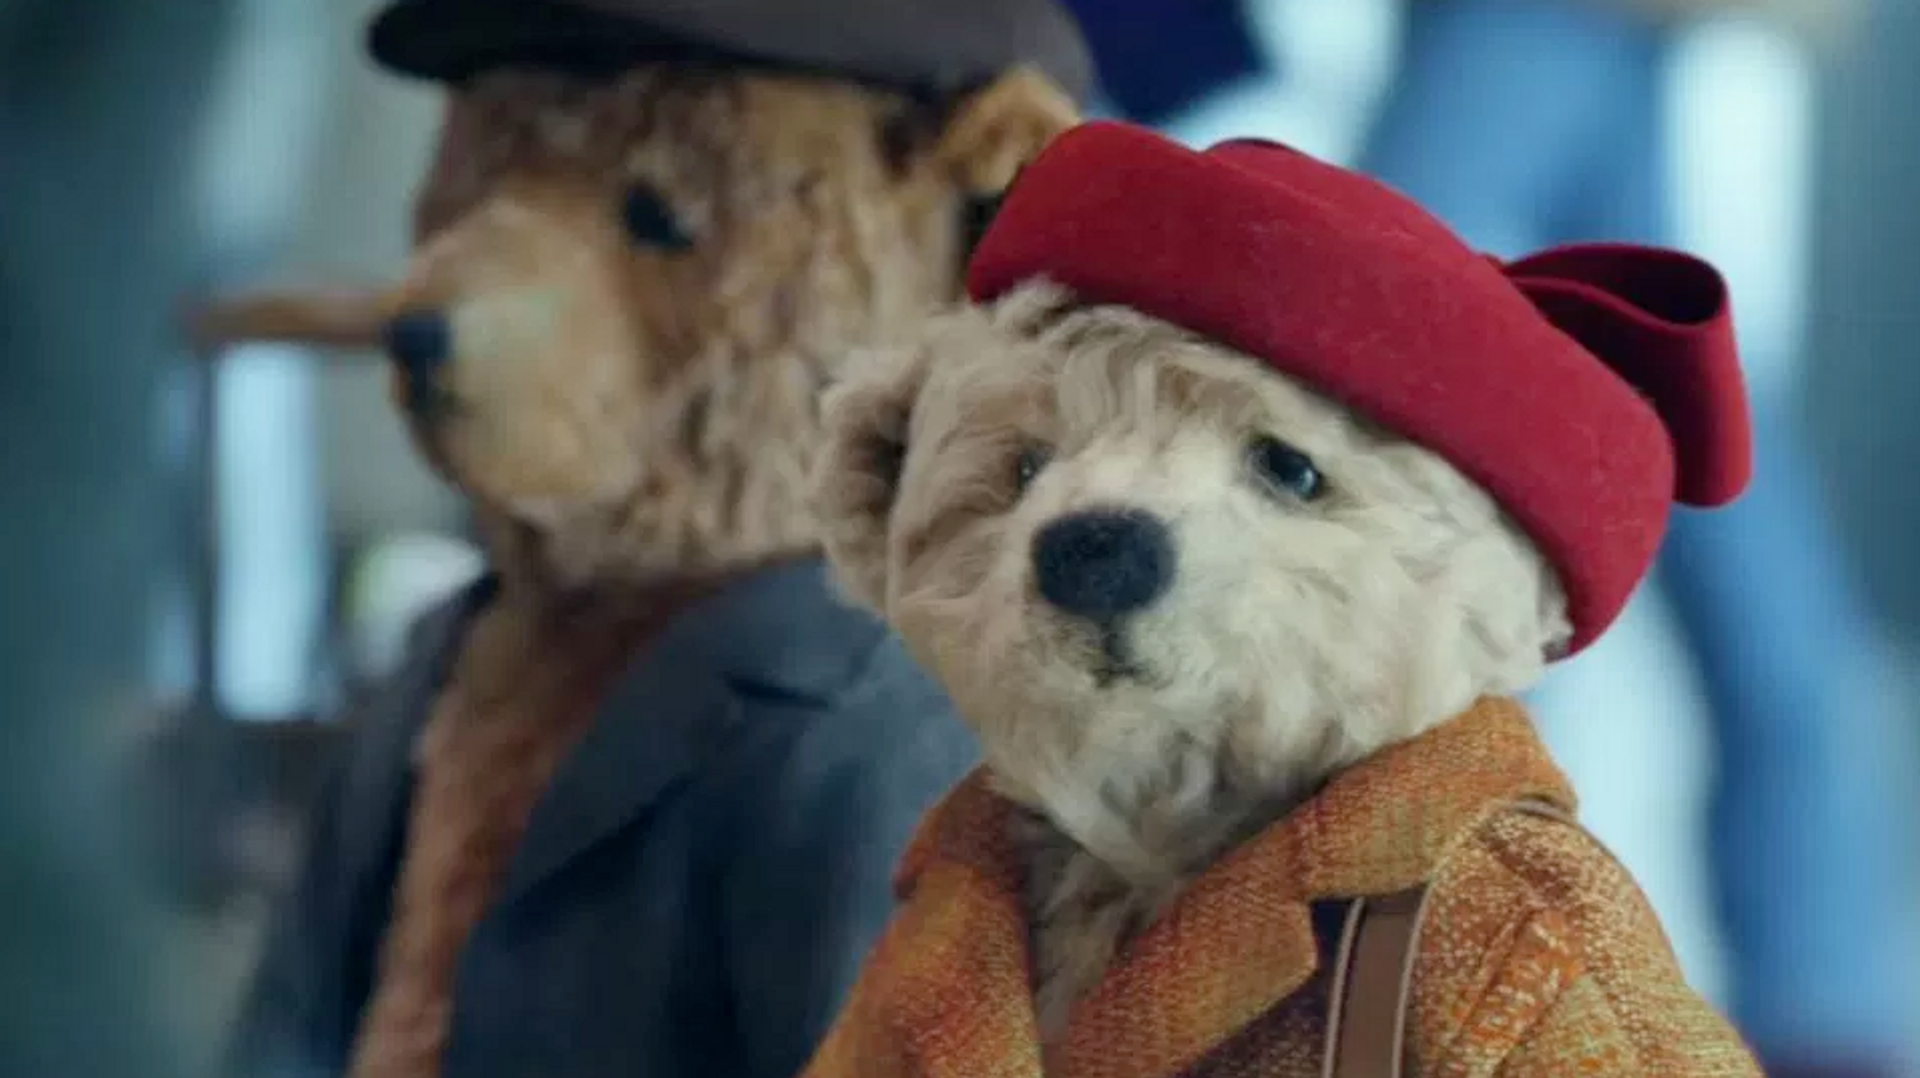 Heathrow launches its first ever Christmas ad